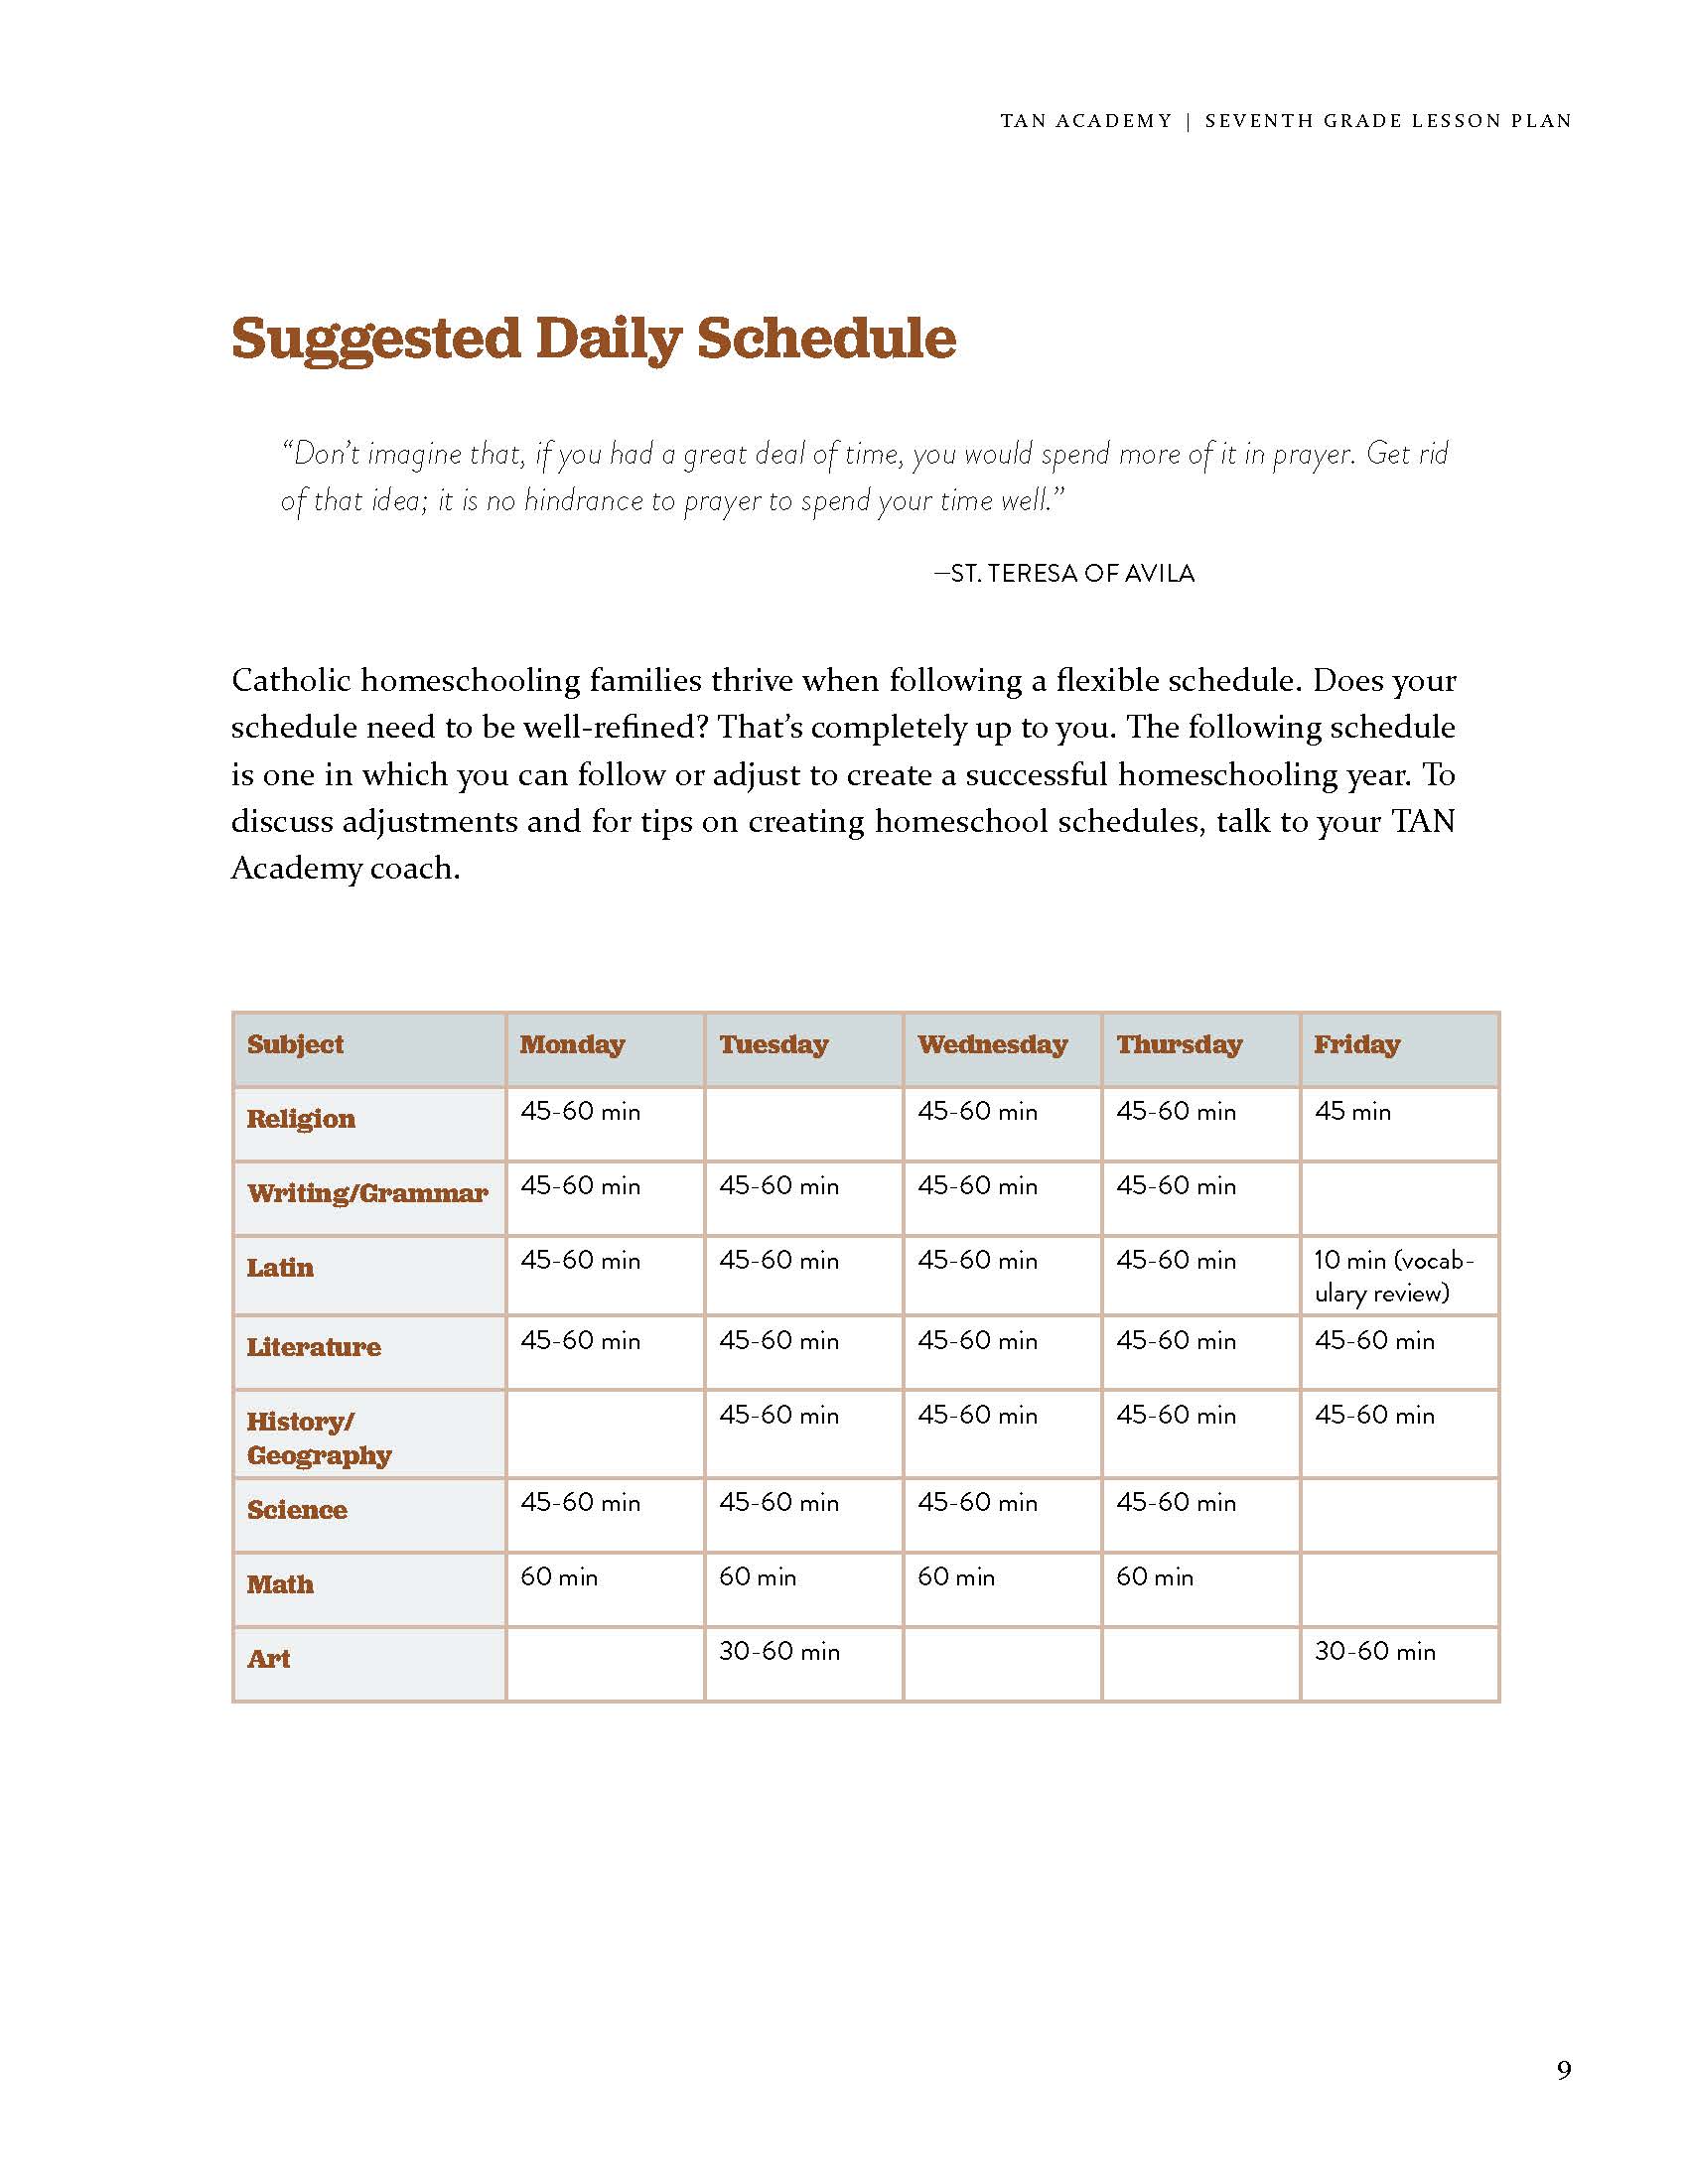 Suggested Daily Schedule-SAMPLE